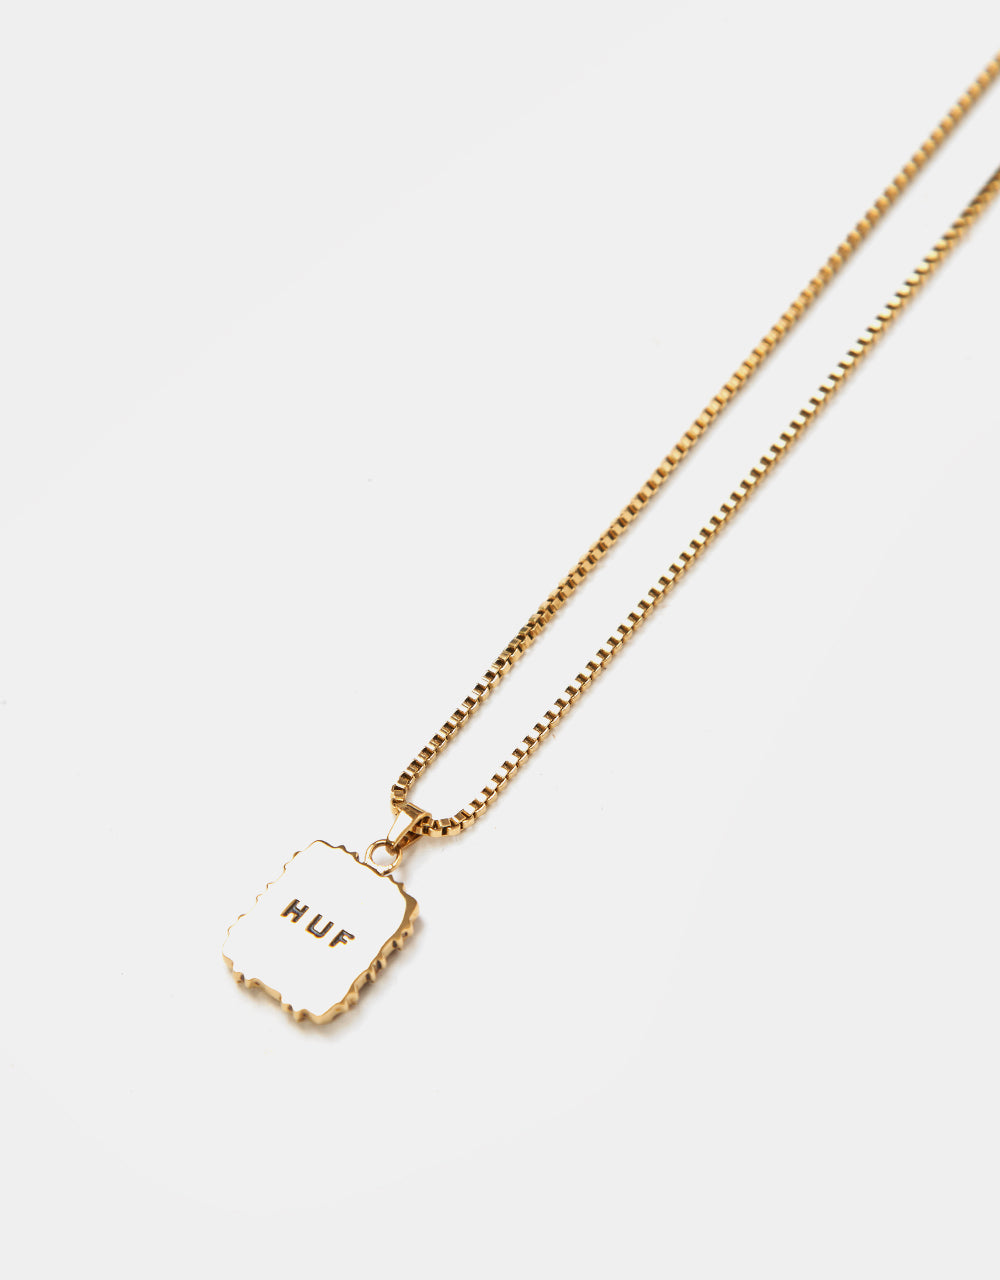 HUF Barbed Wire Pendant - Gold